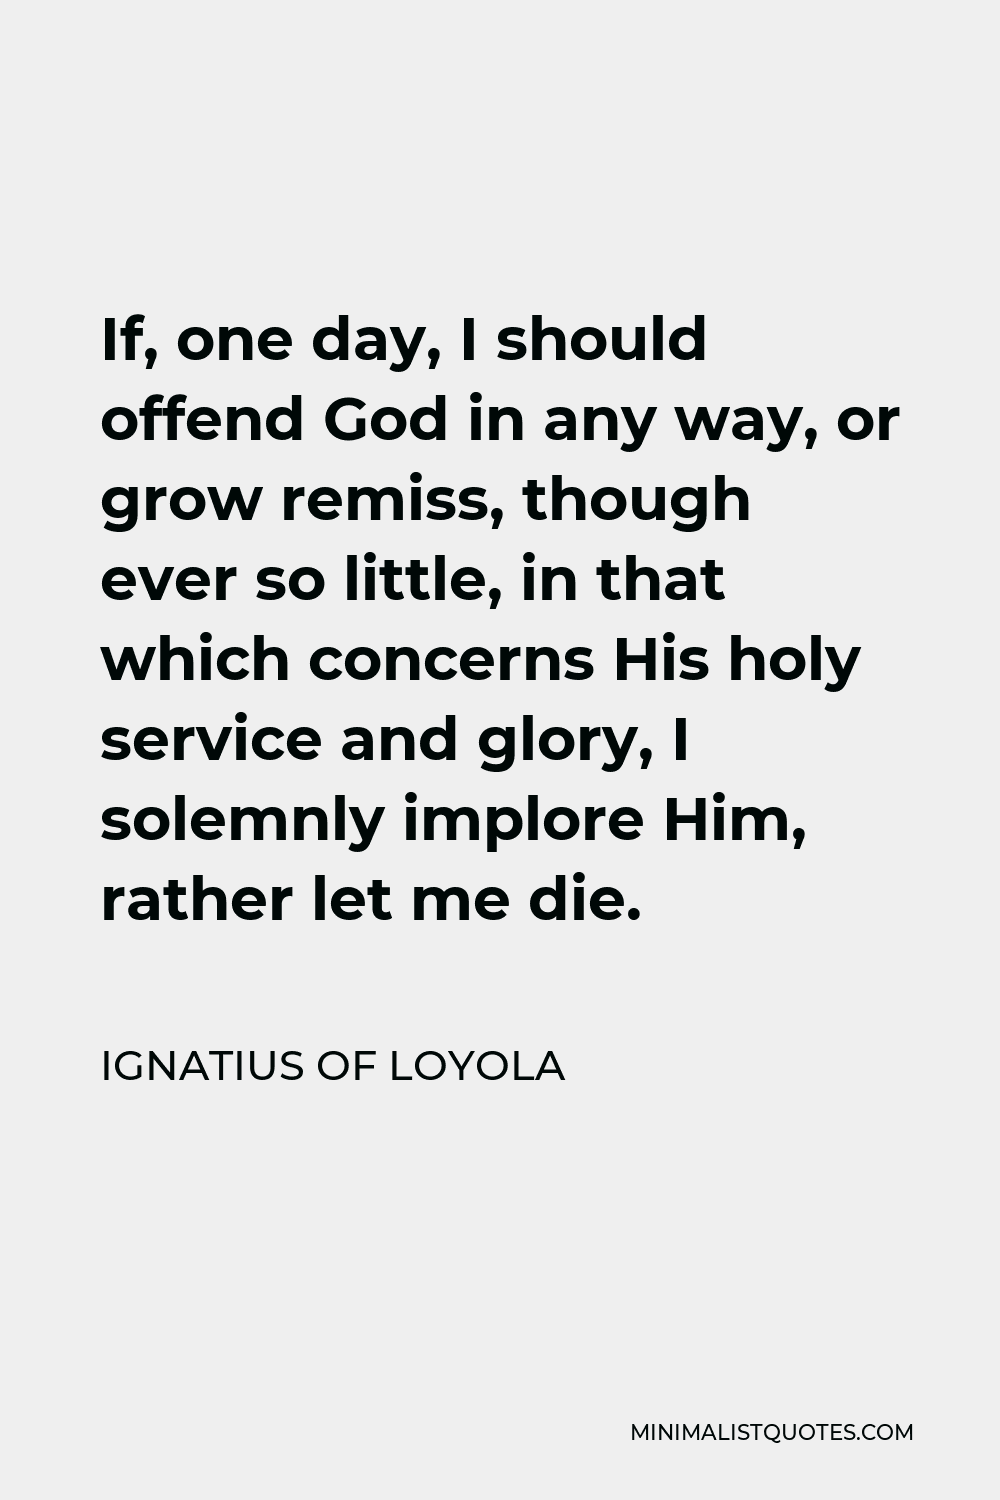 Ignatius of Loyola Quote - If, one day, I should offend God in any way, or grow remiss, though ever so little, in that which concerns His holy service and glory, I solemnly implore Him, rather let me die.